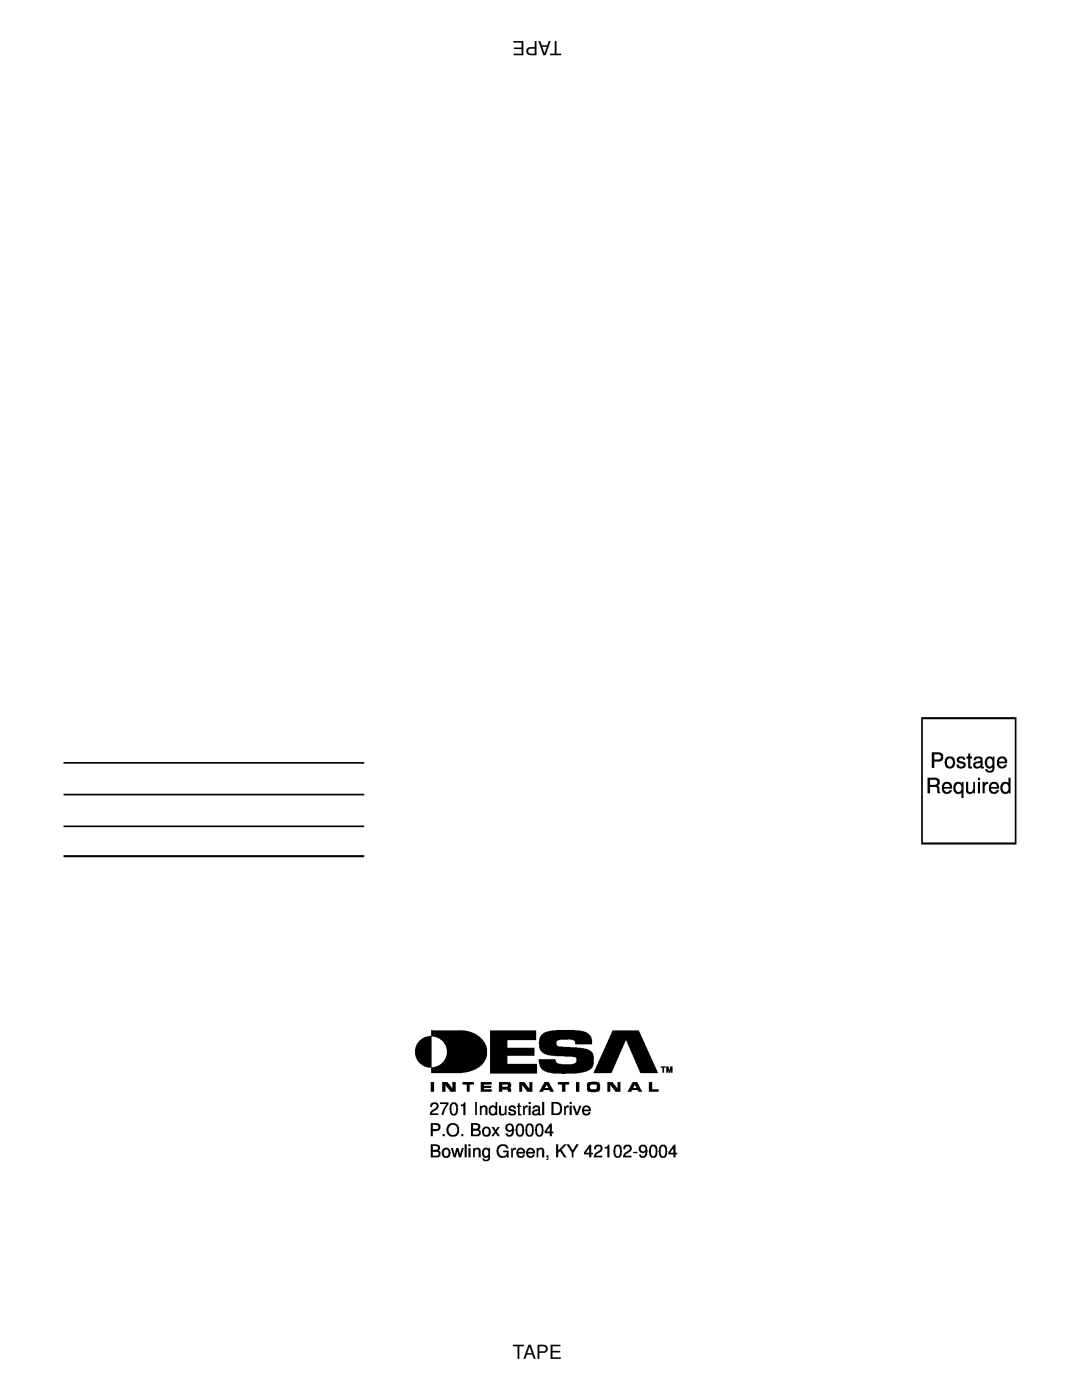 Desa YGF33PRB, FPVF33NRA installation manual Postage Required, Tape 